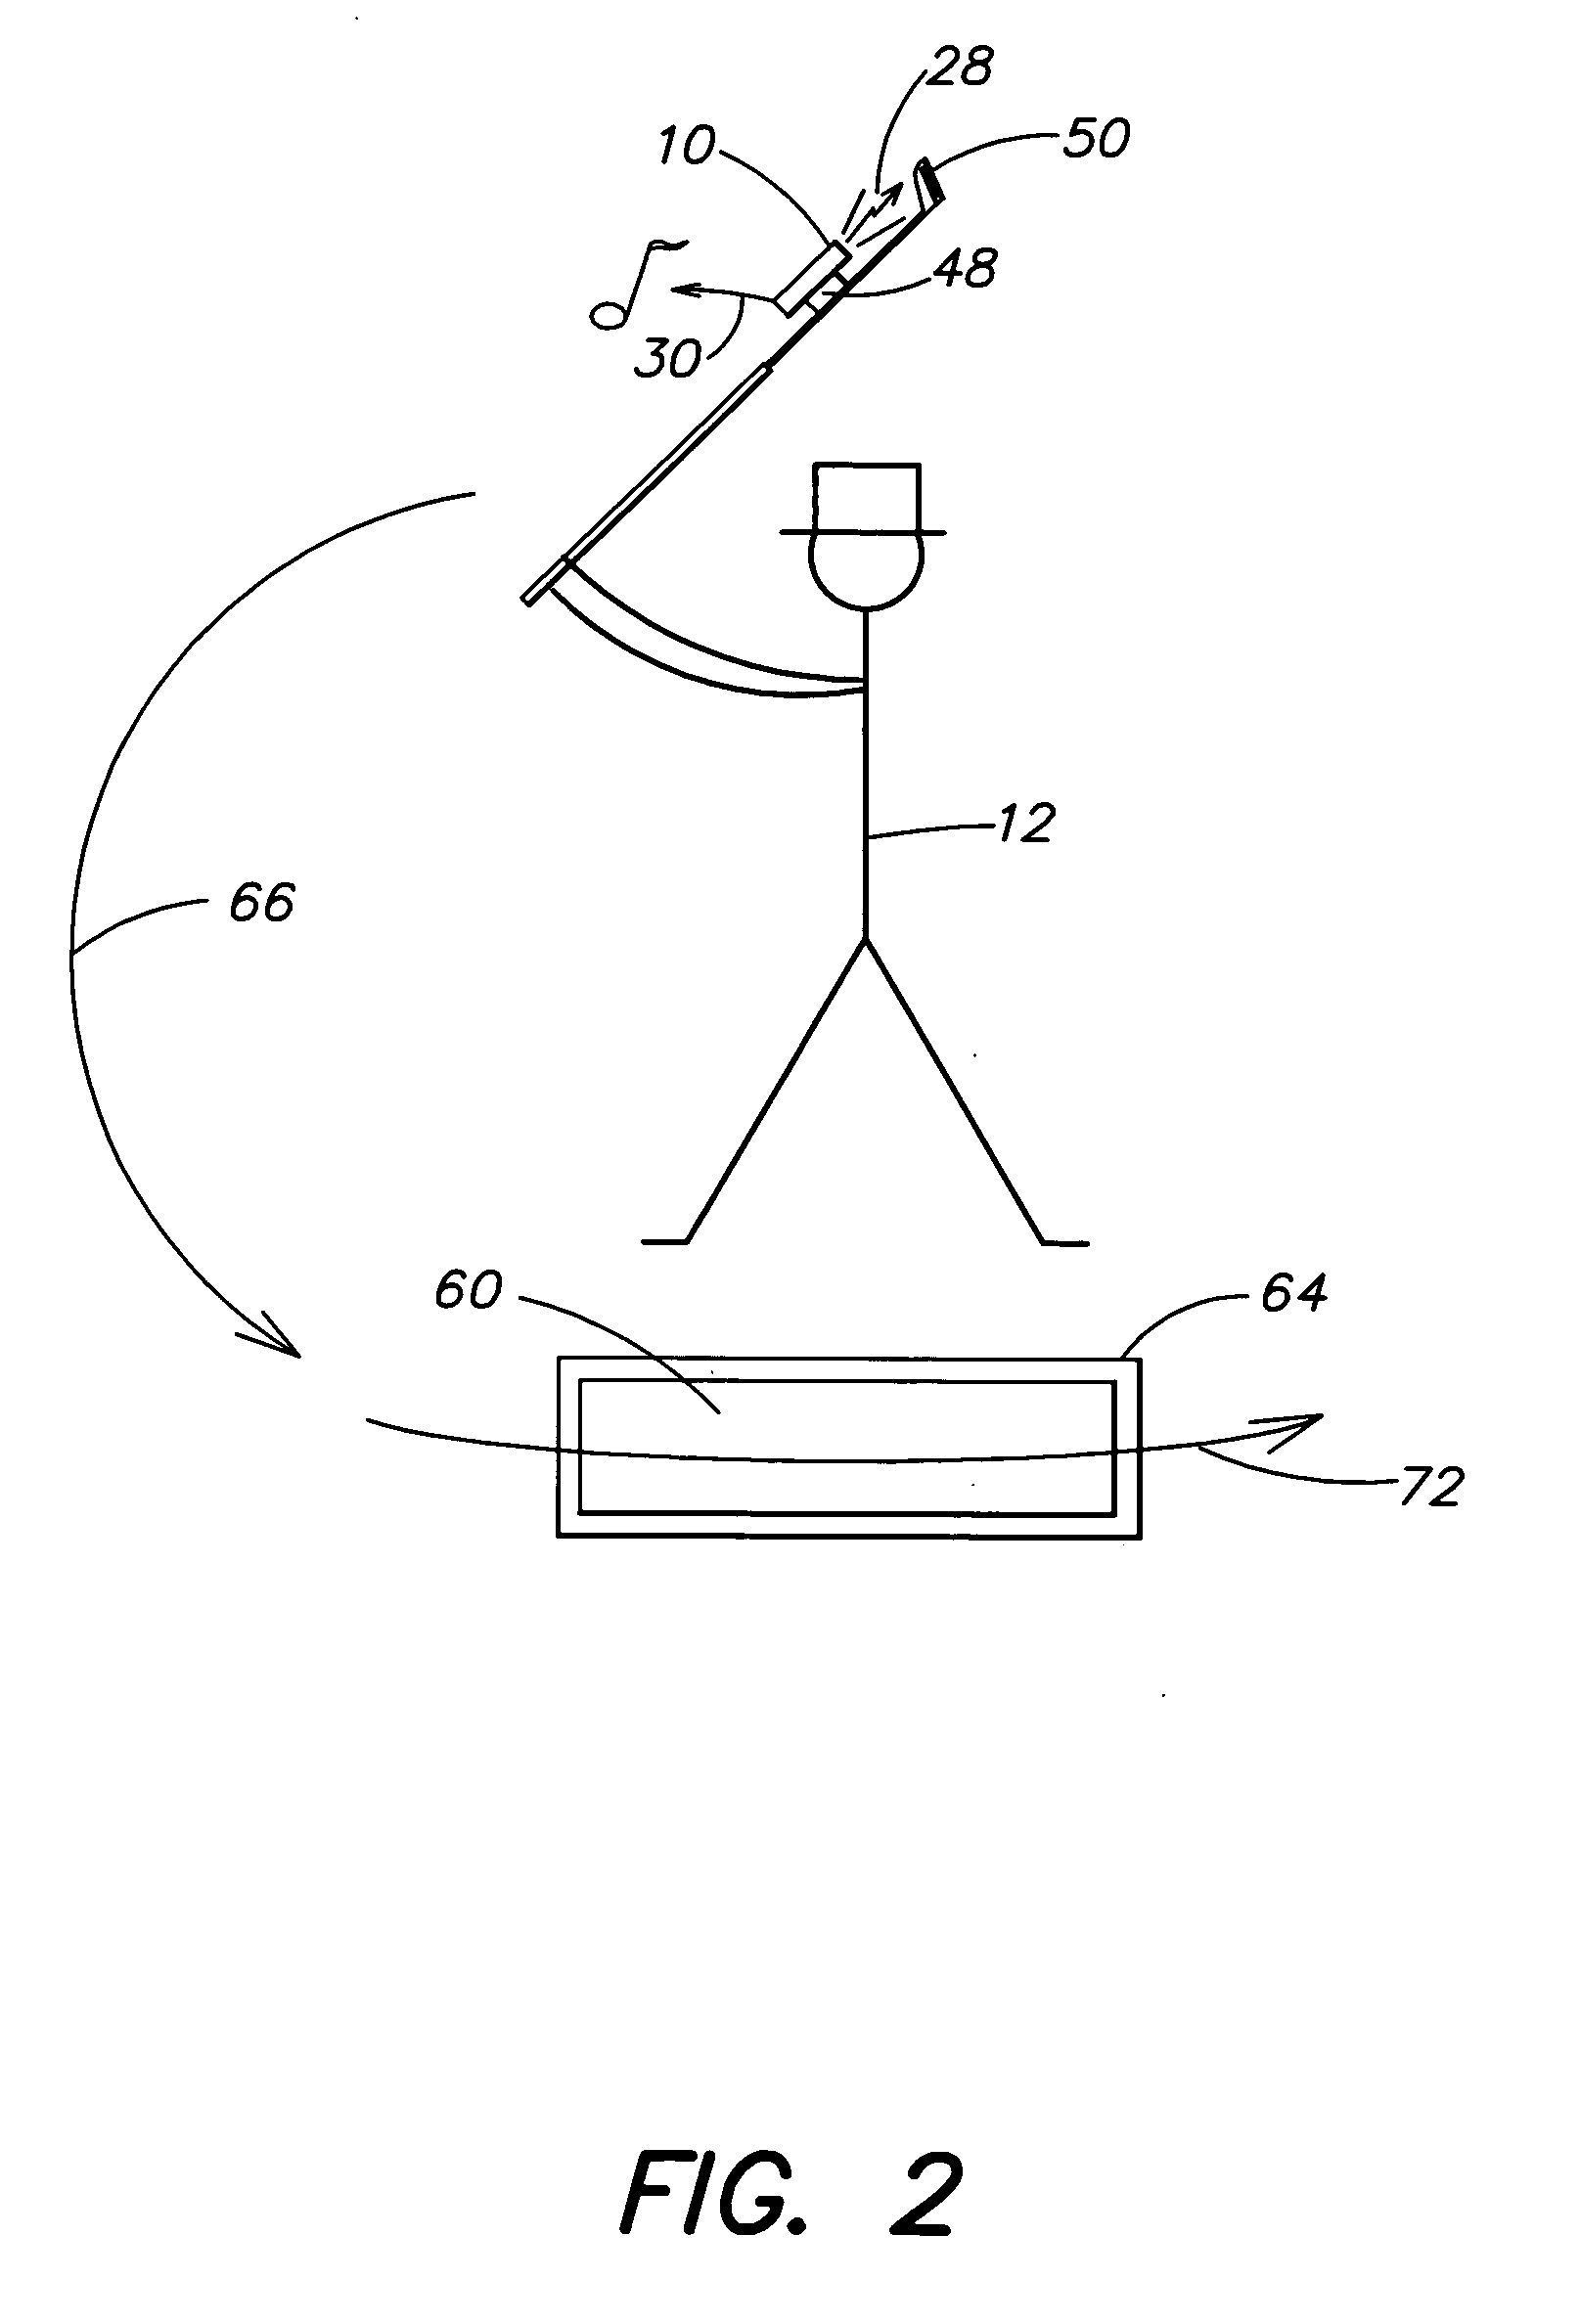 Methods and apparatus for providing feedback to a subject in connection with performing a task